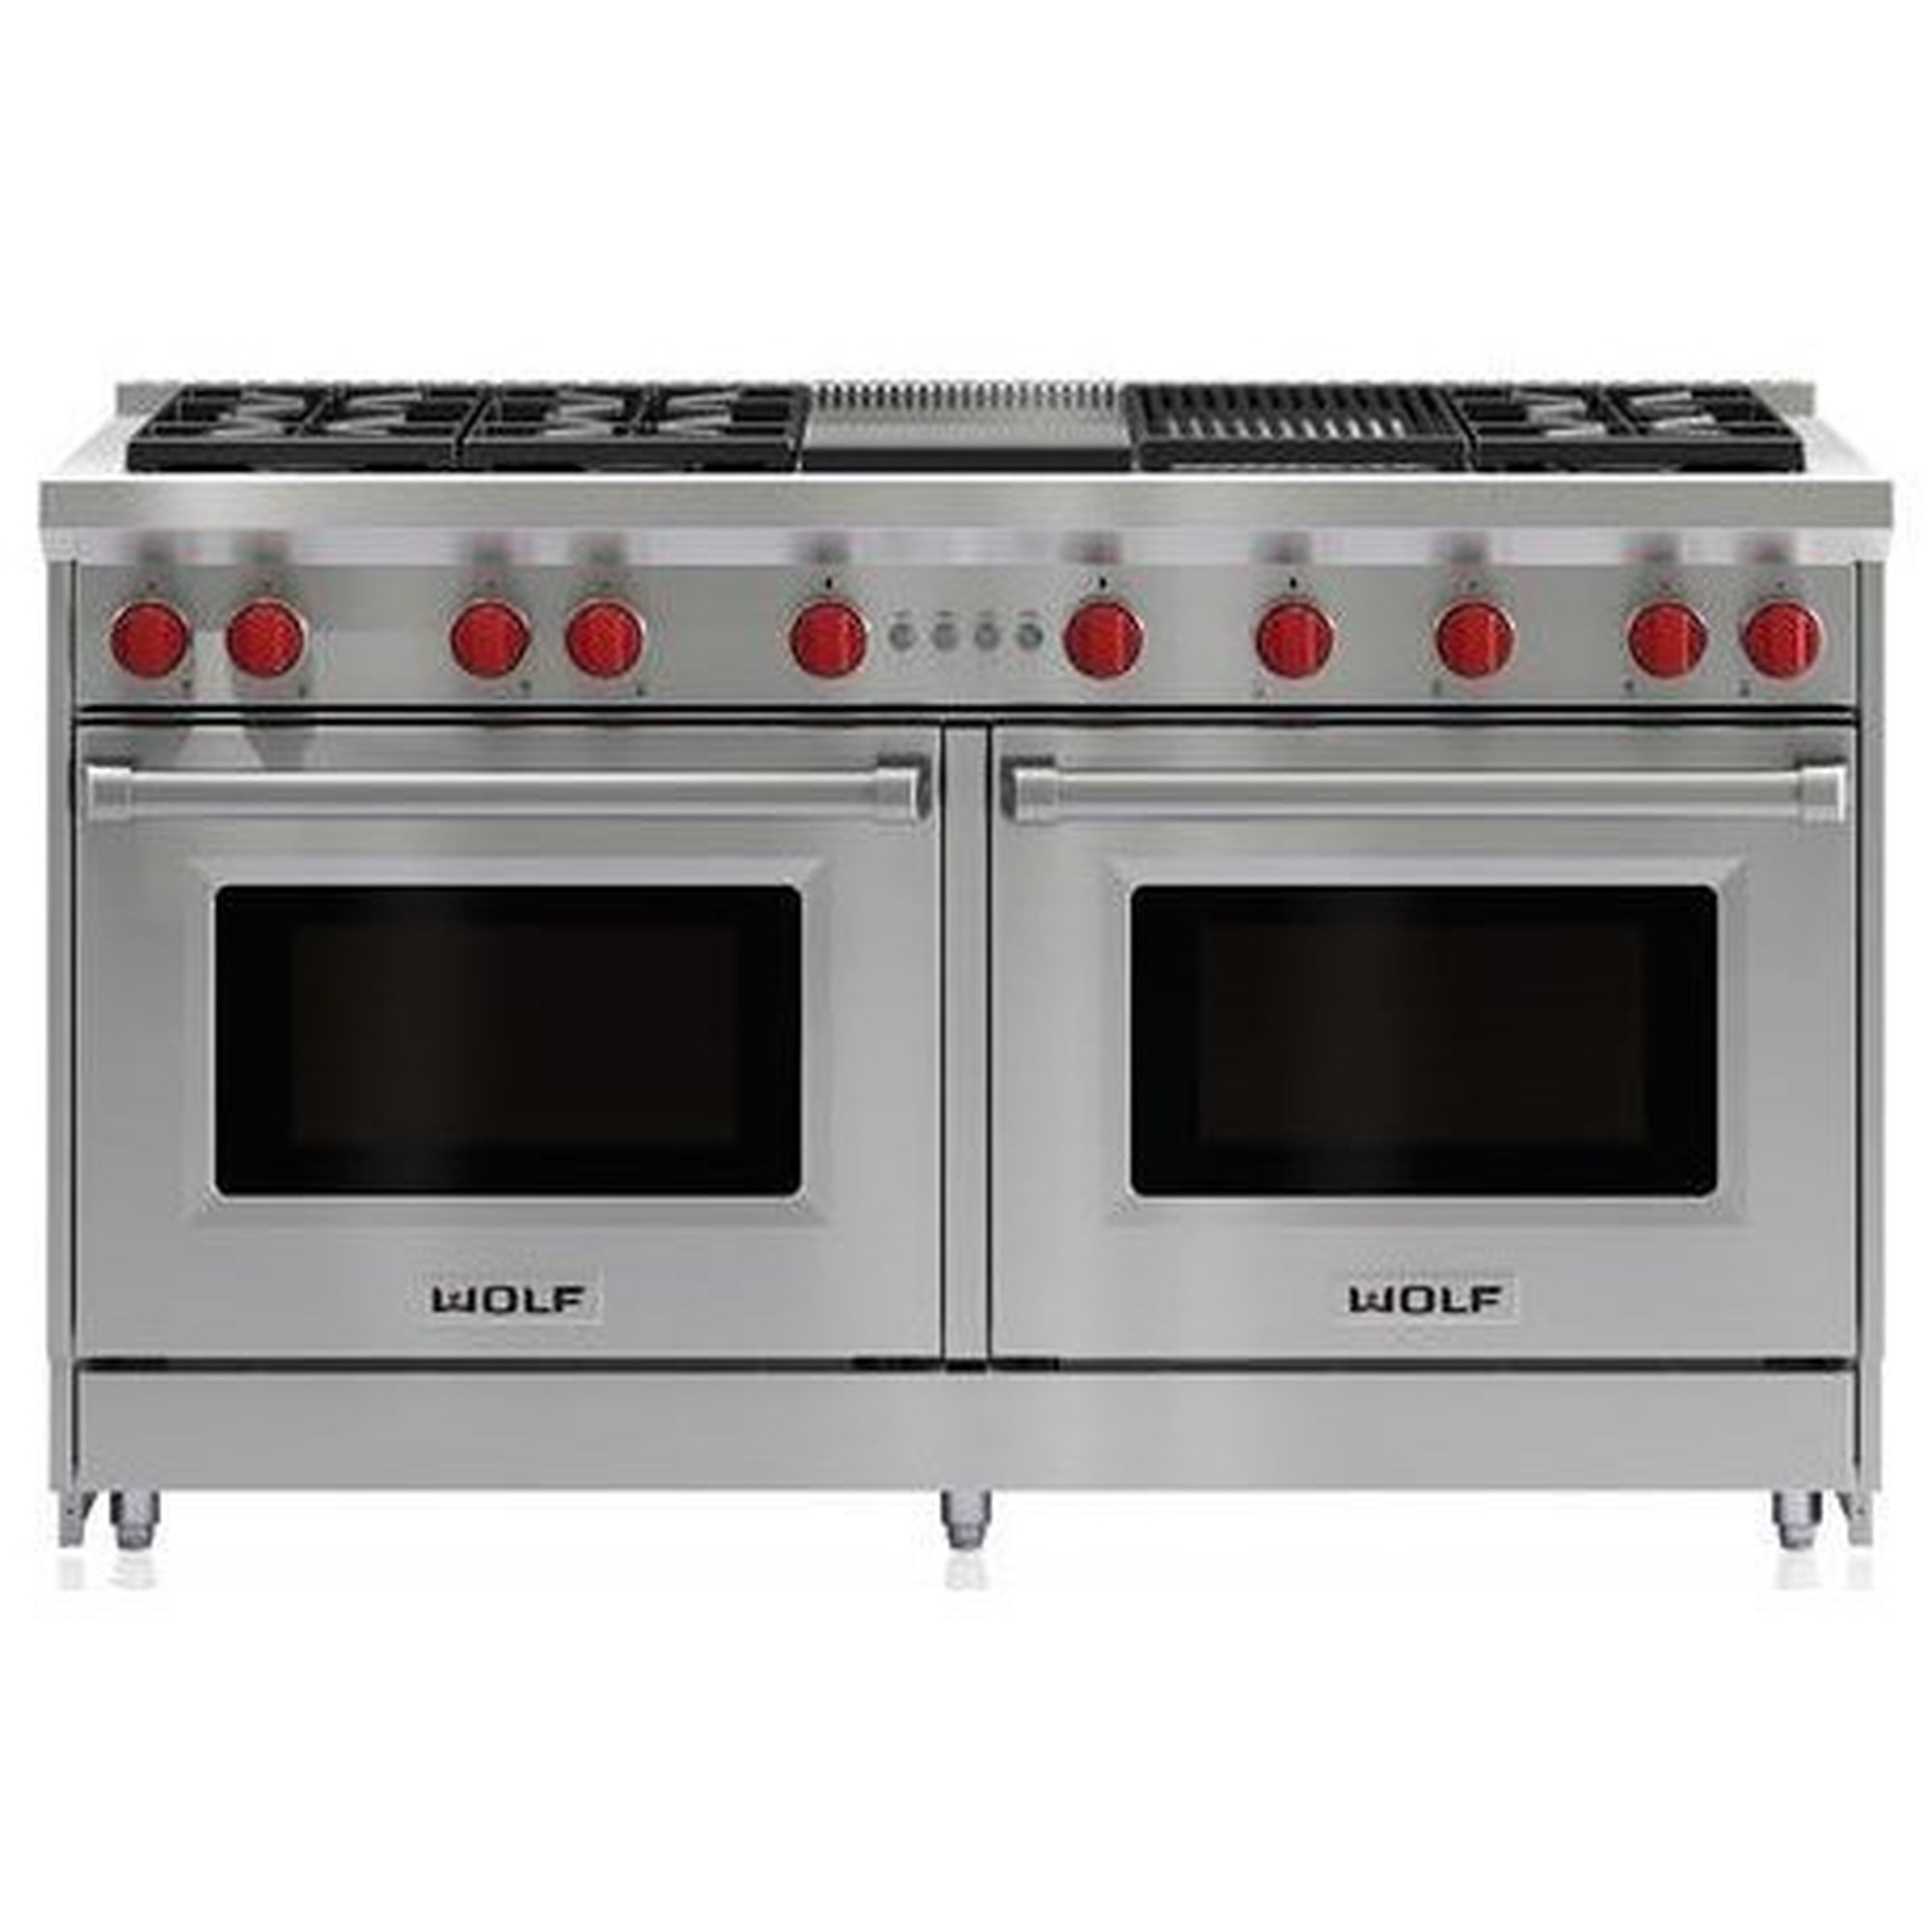 Wolf Countertop Convection Oven in Stainless Steel W/Red Knobs